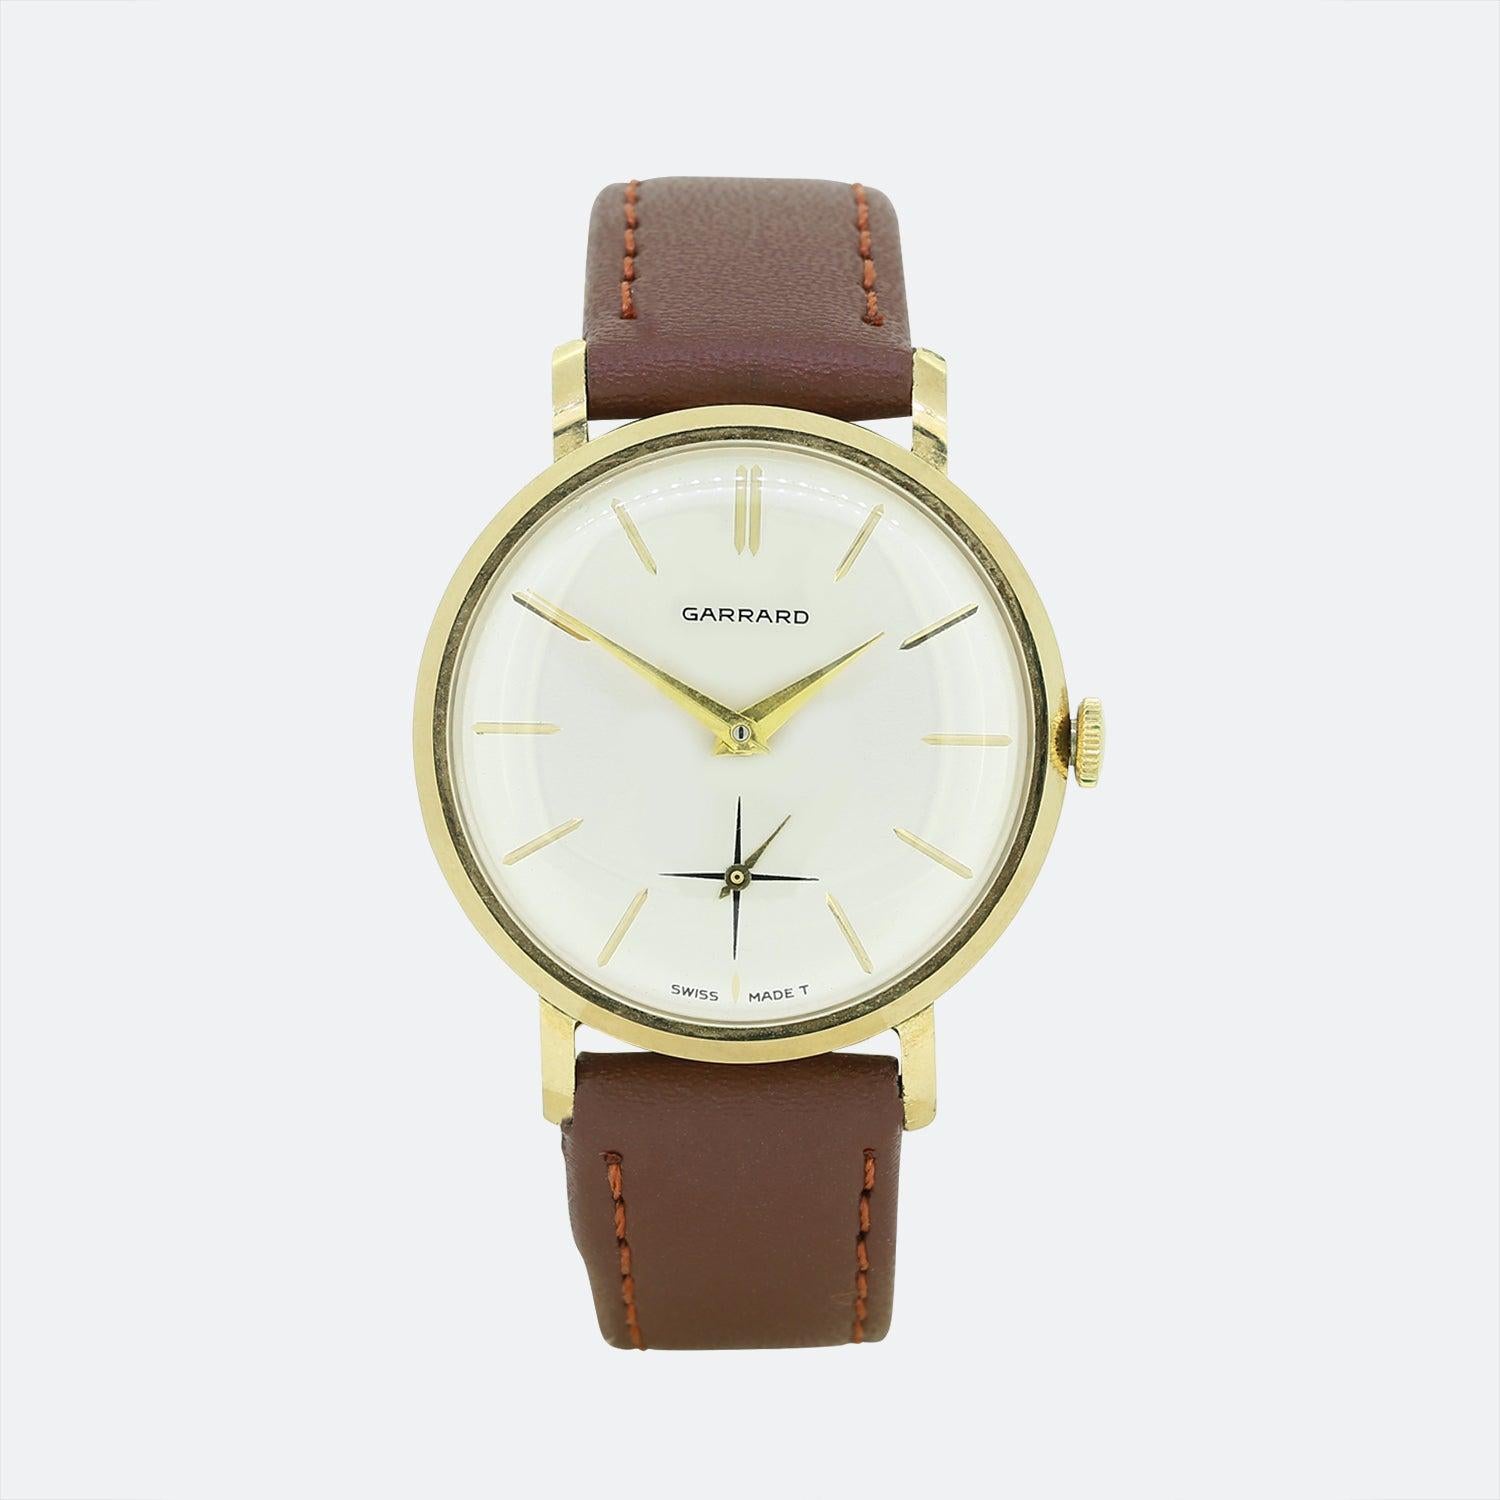 This is a delightful vintage wristwatch from the luxury jewellery designer Garrard. This piece features a circular face with a silver dial, gold hour markers and gold hands. It also features a seconds subdial and is manual self wind. The watch